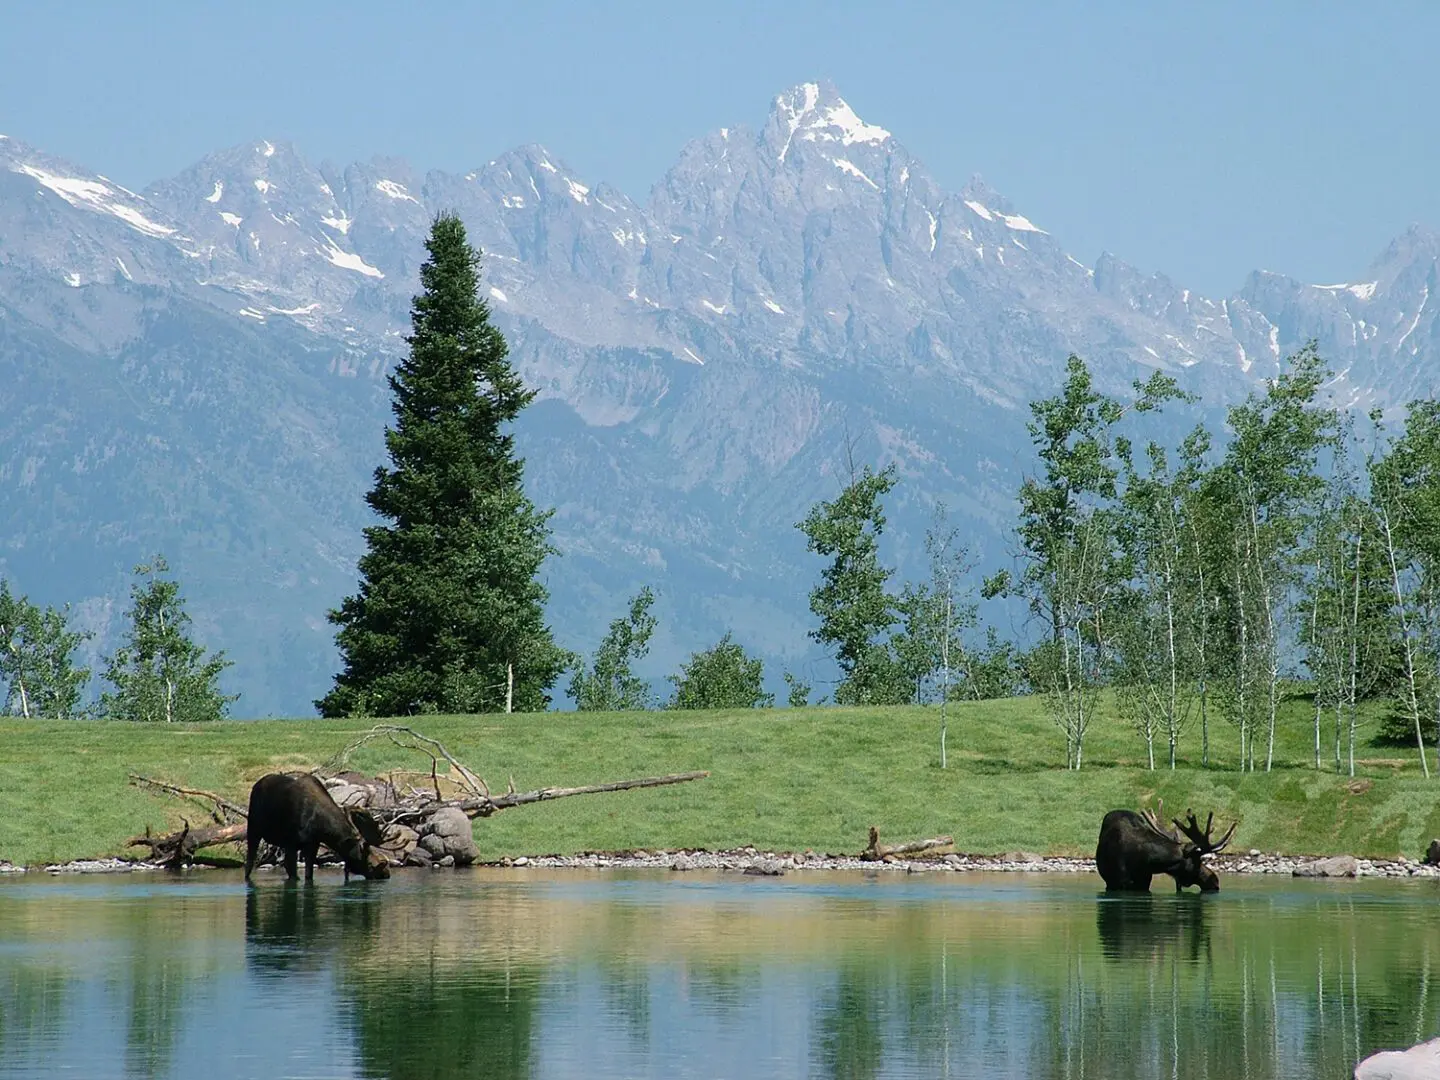 Two elephants in a field near water and mountains.